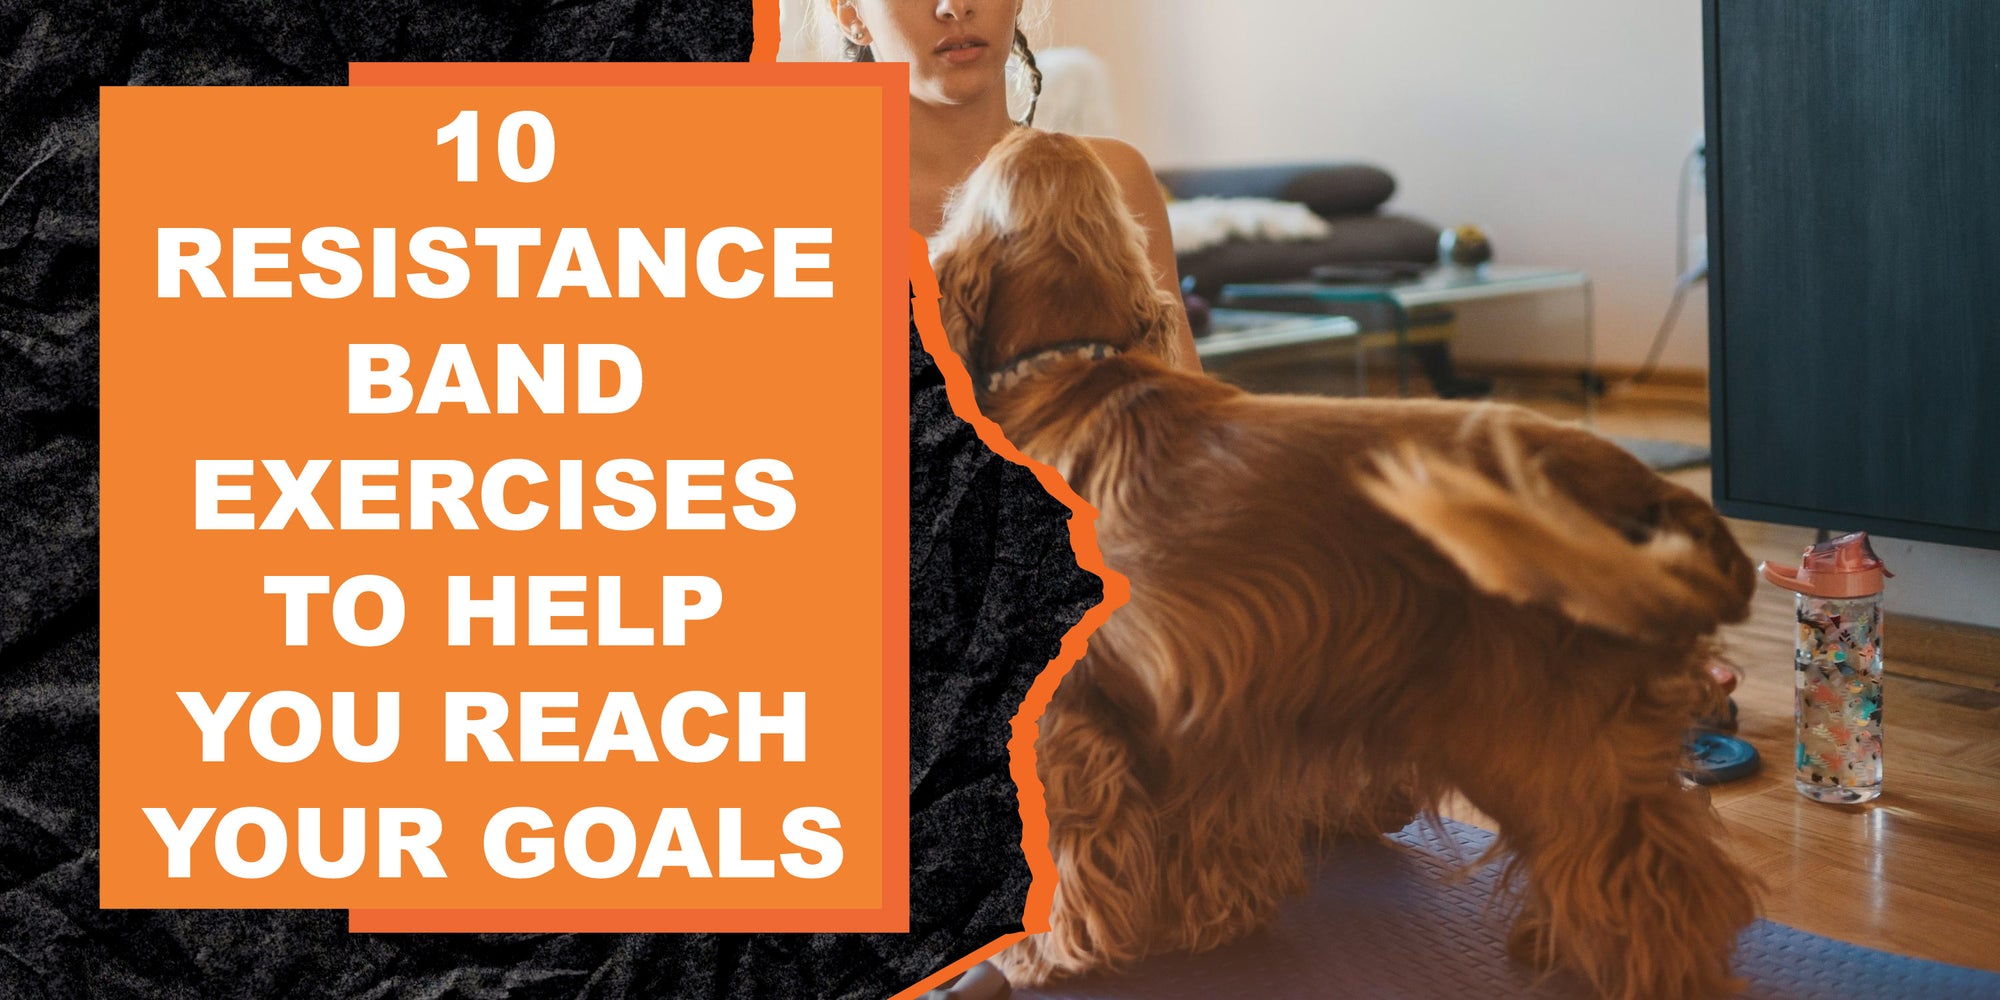 10 Resistance Band Exercises to Help You Reach Your Goals